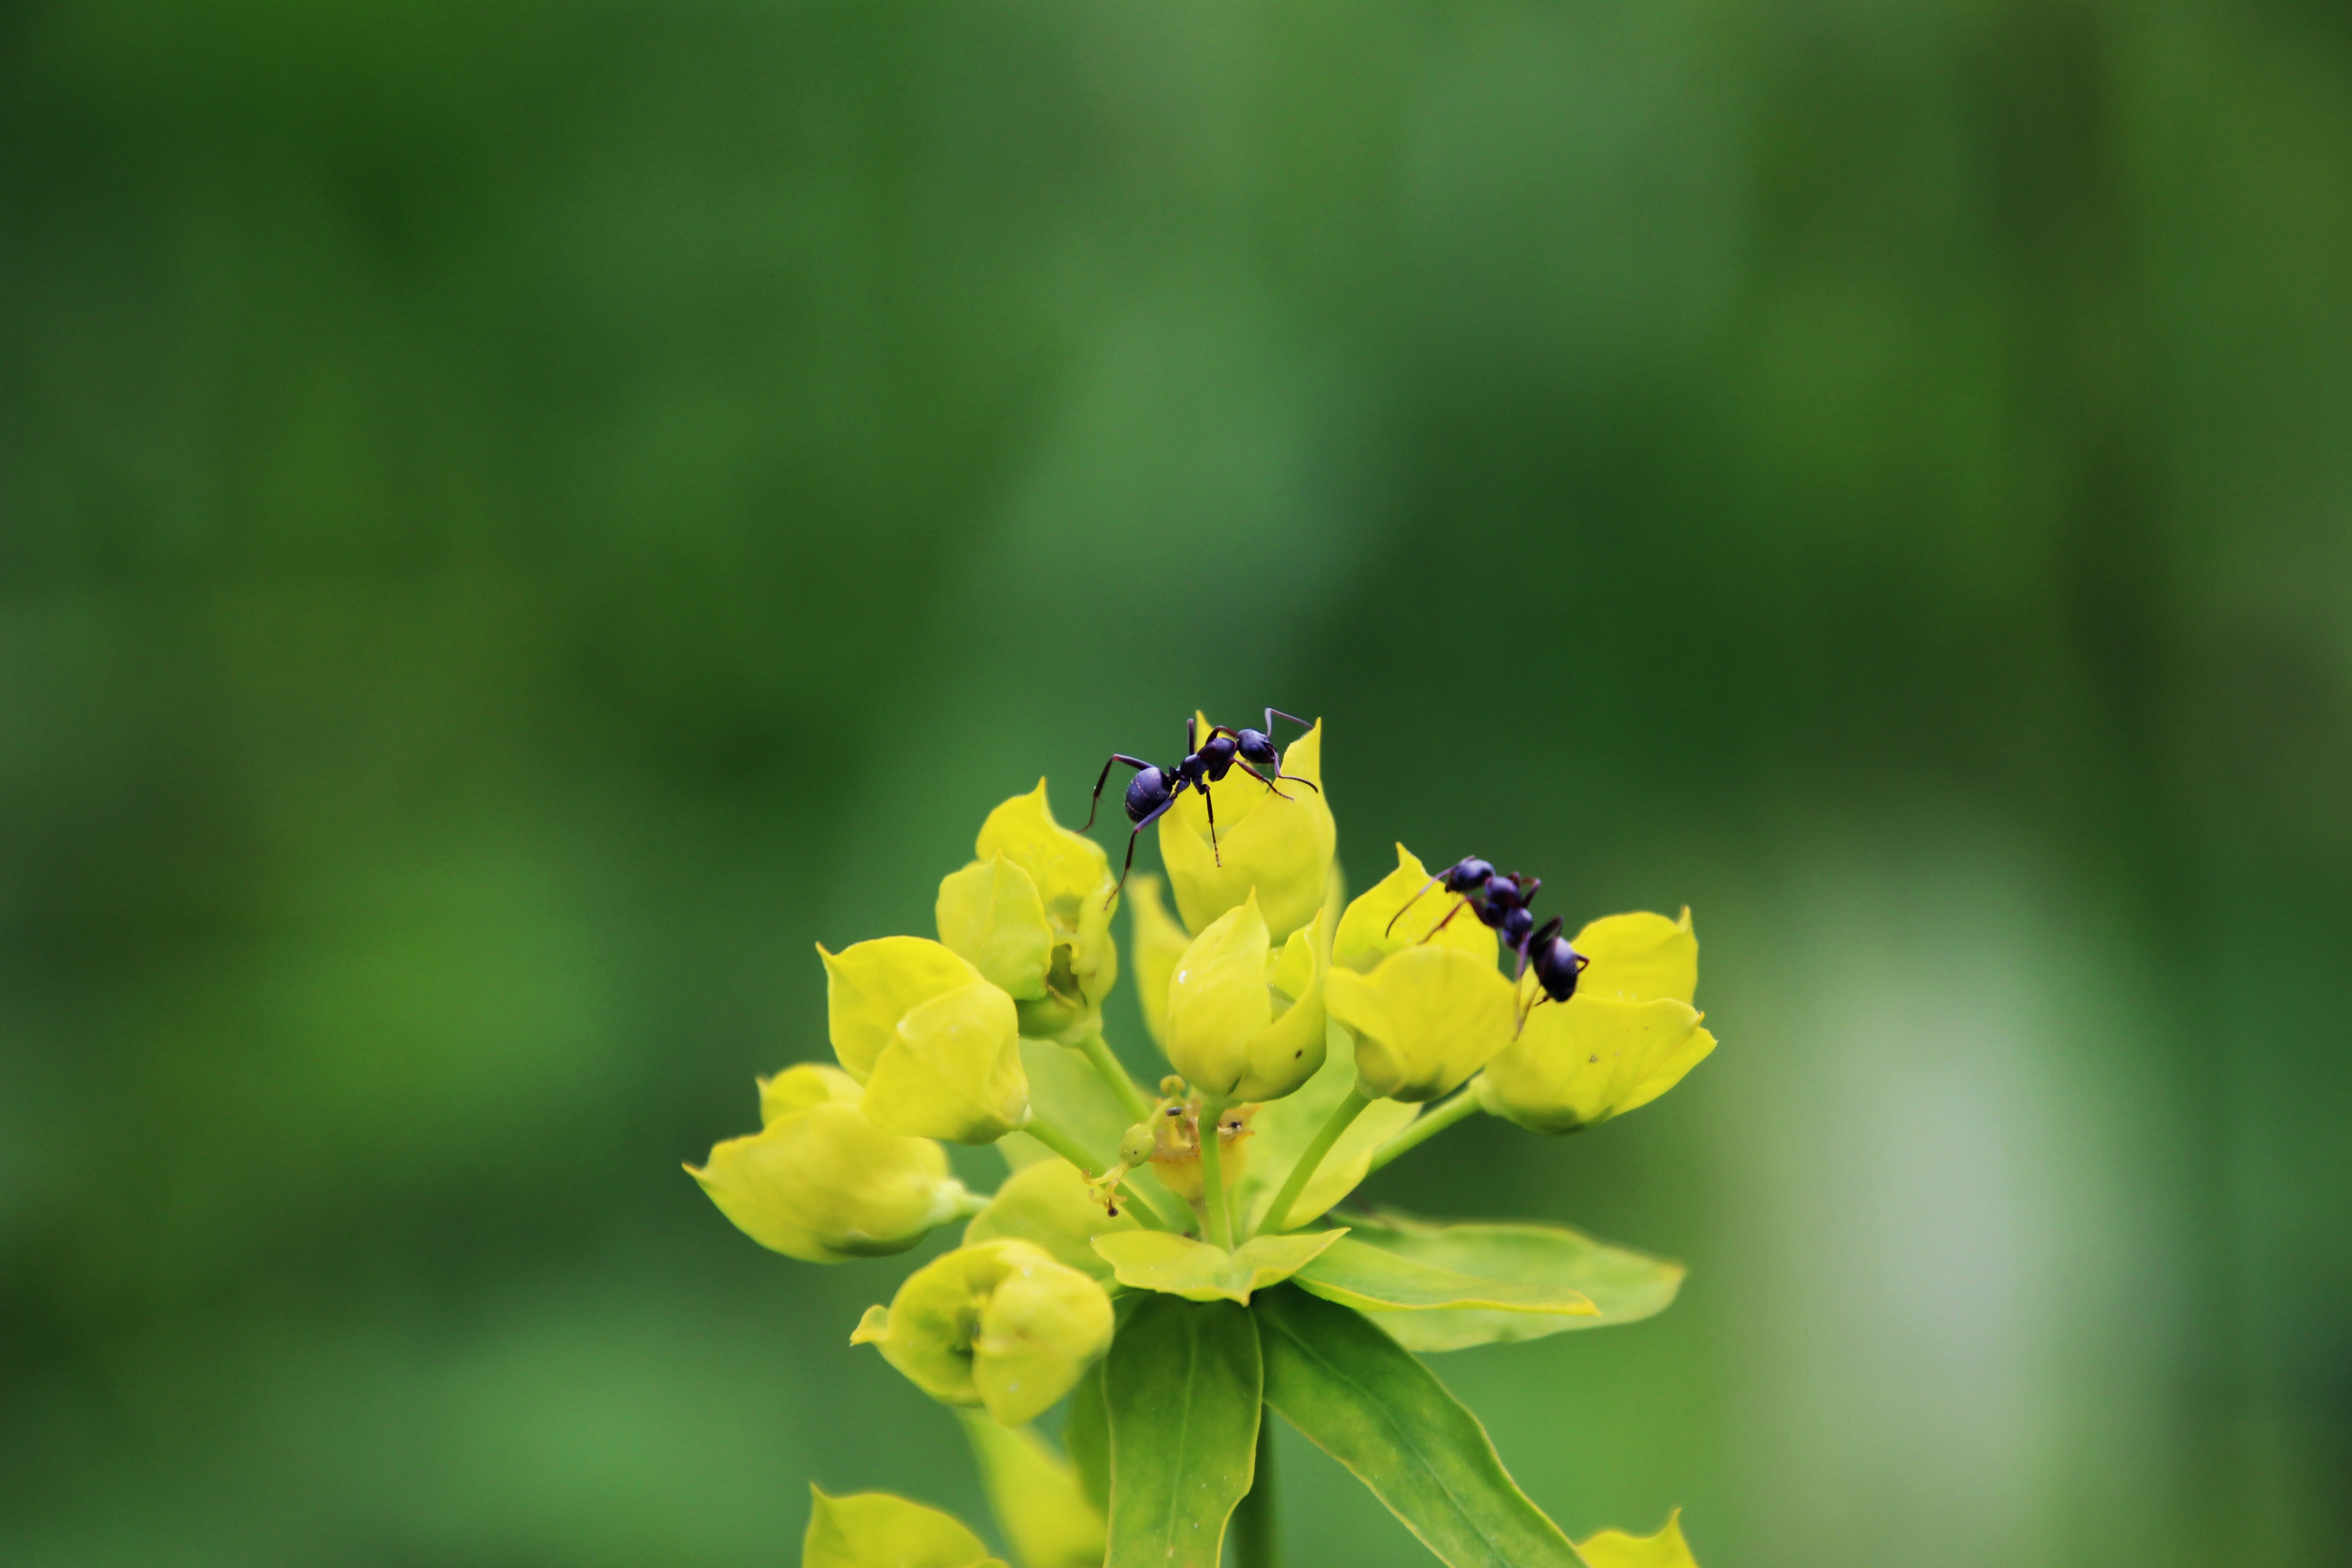 Two ants pollinating a flower